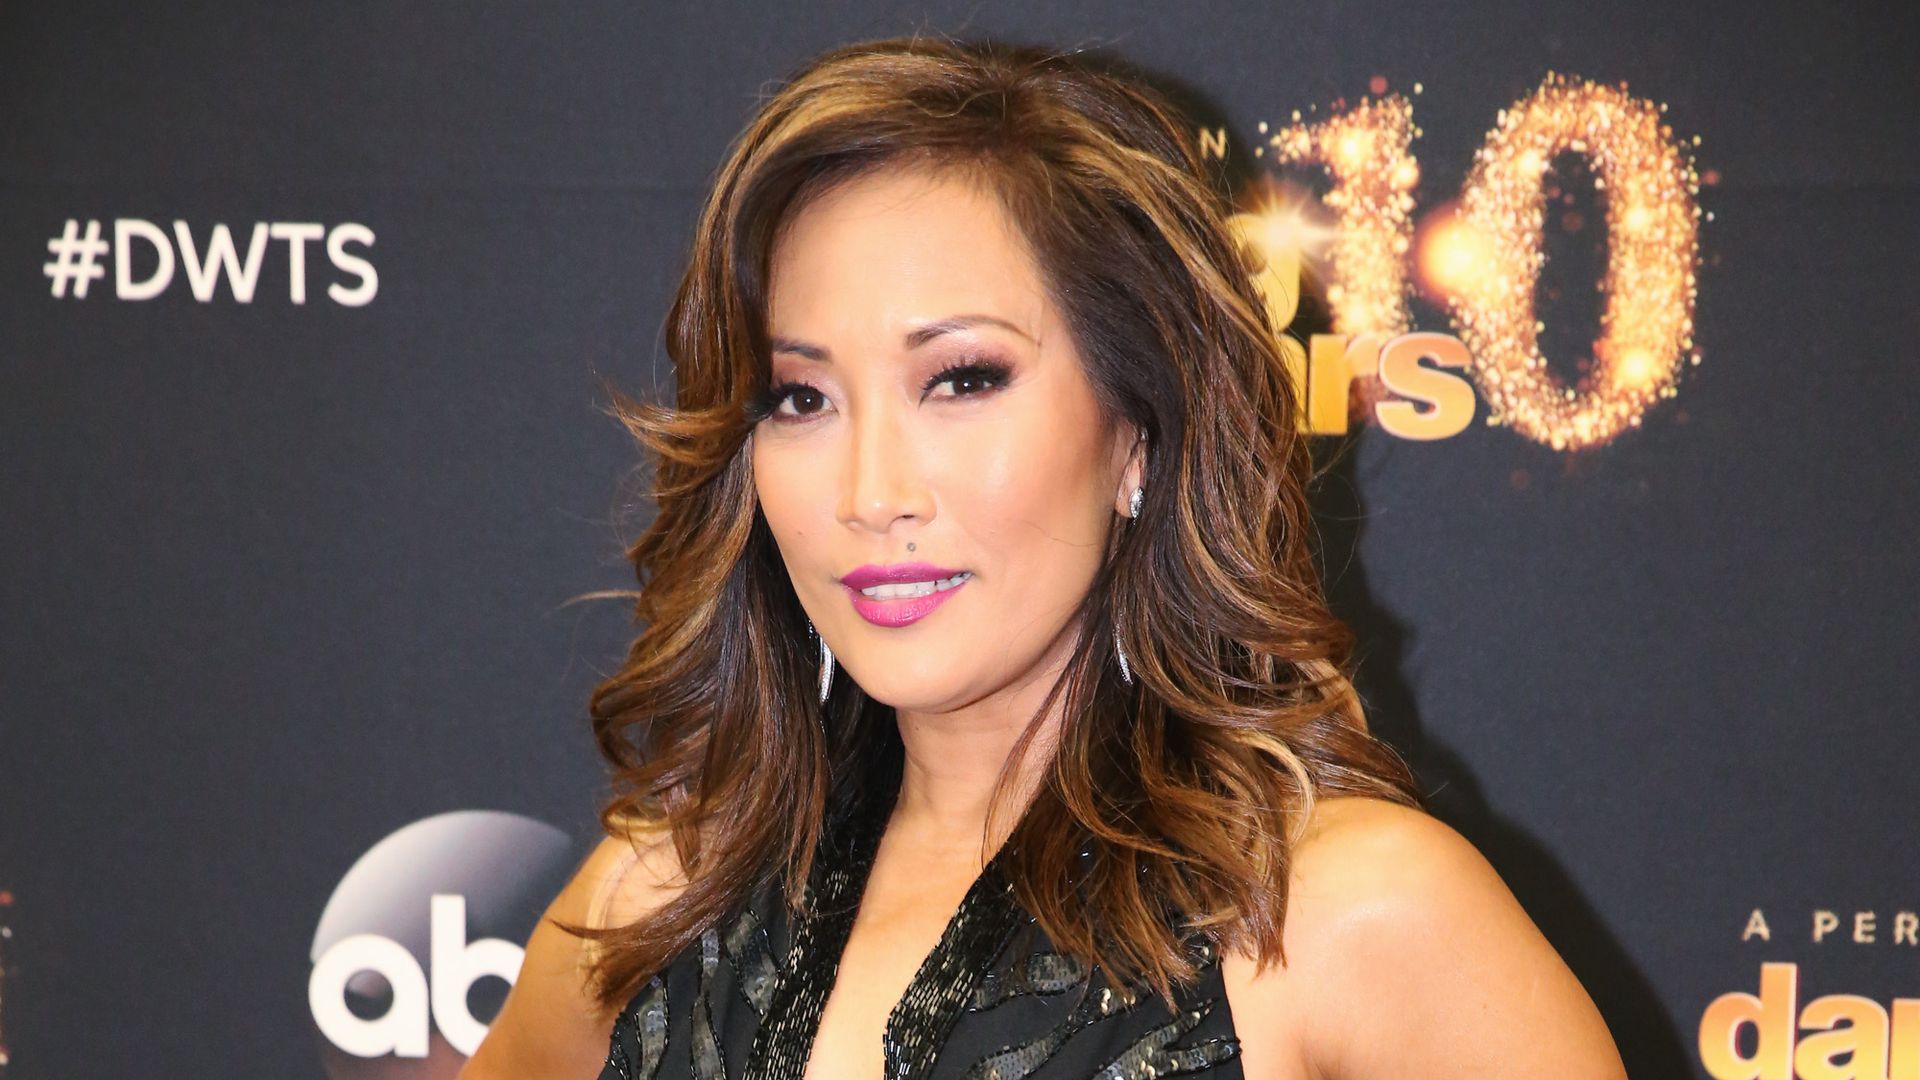 Carrie Ann Inaba makes devastating revelation about DWTS one year on from co-star Len Goodman's death